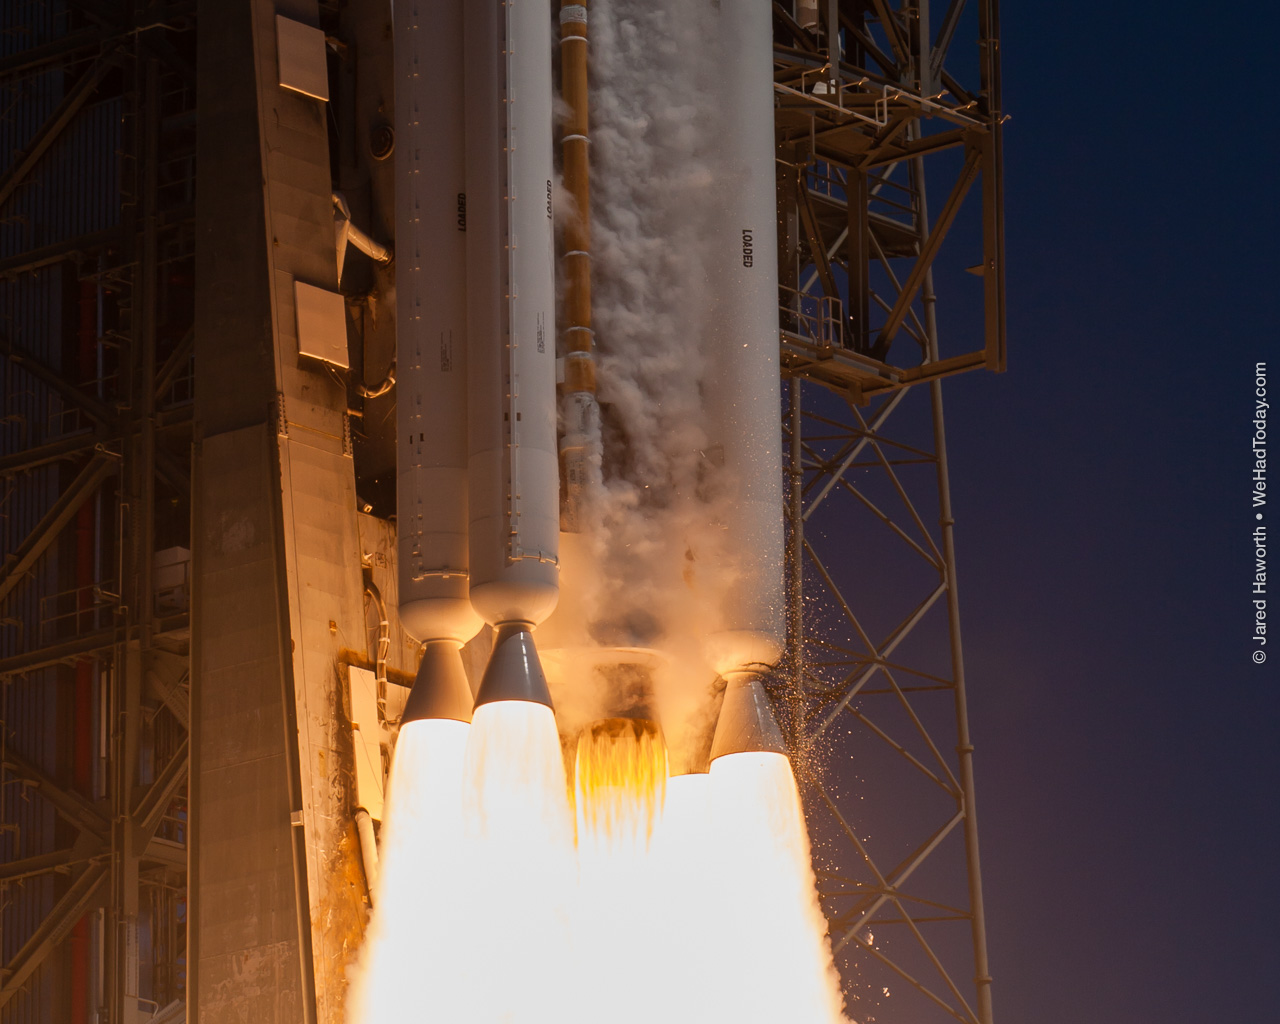 The five AJ-60A solid rocket boosters add their extreme kick to the RD-180 main engine to deliver the heaviest payloads to orbit.